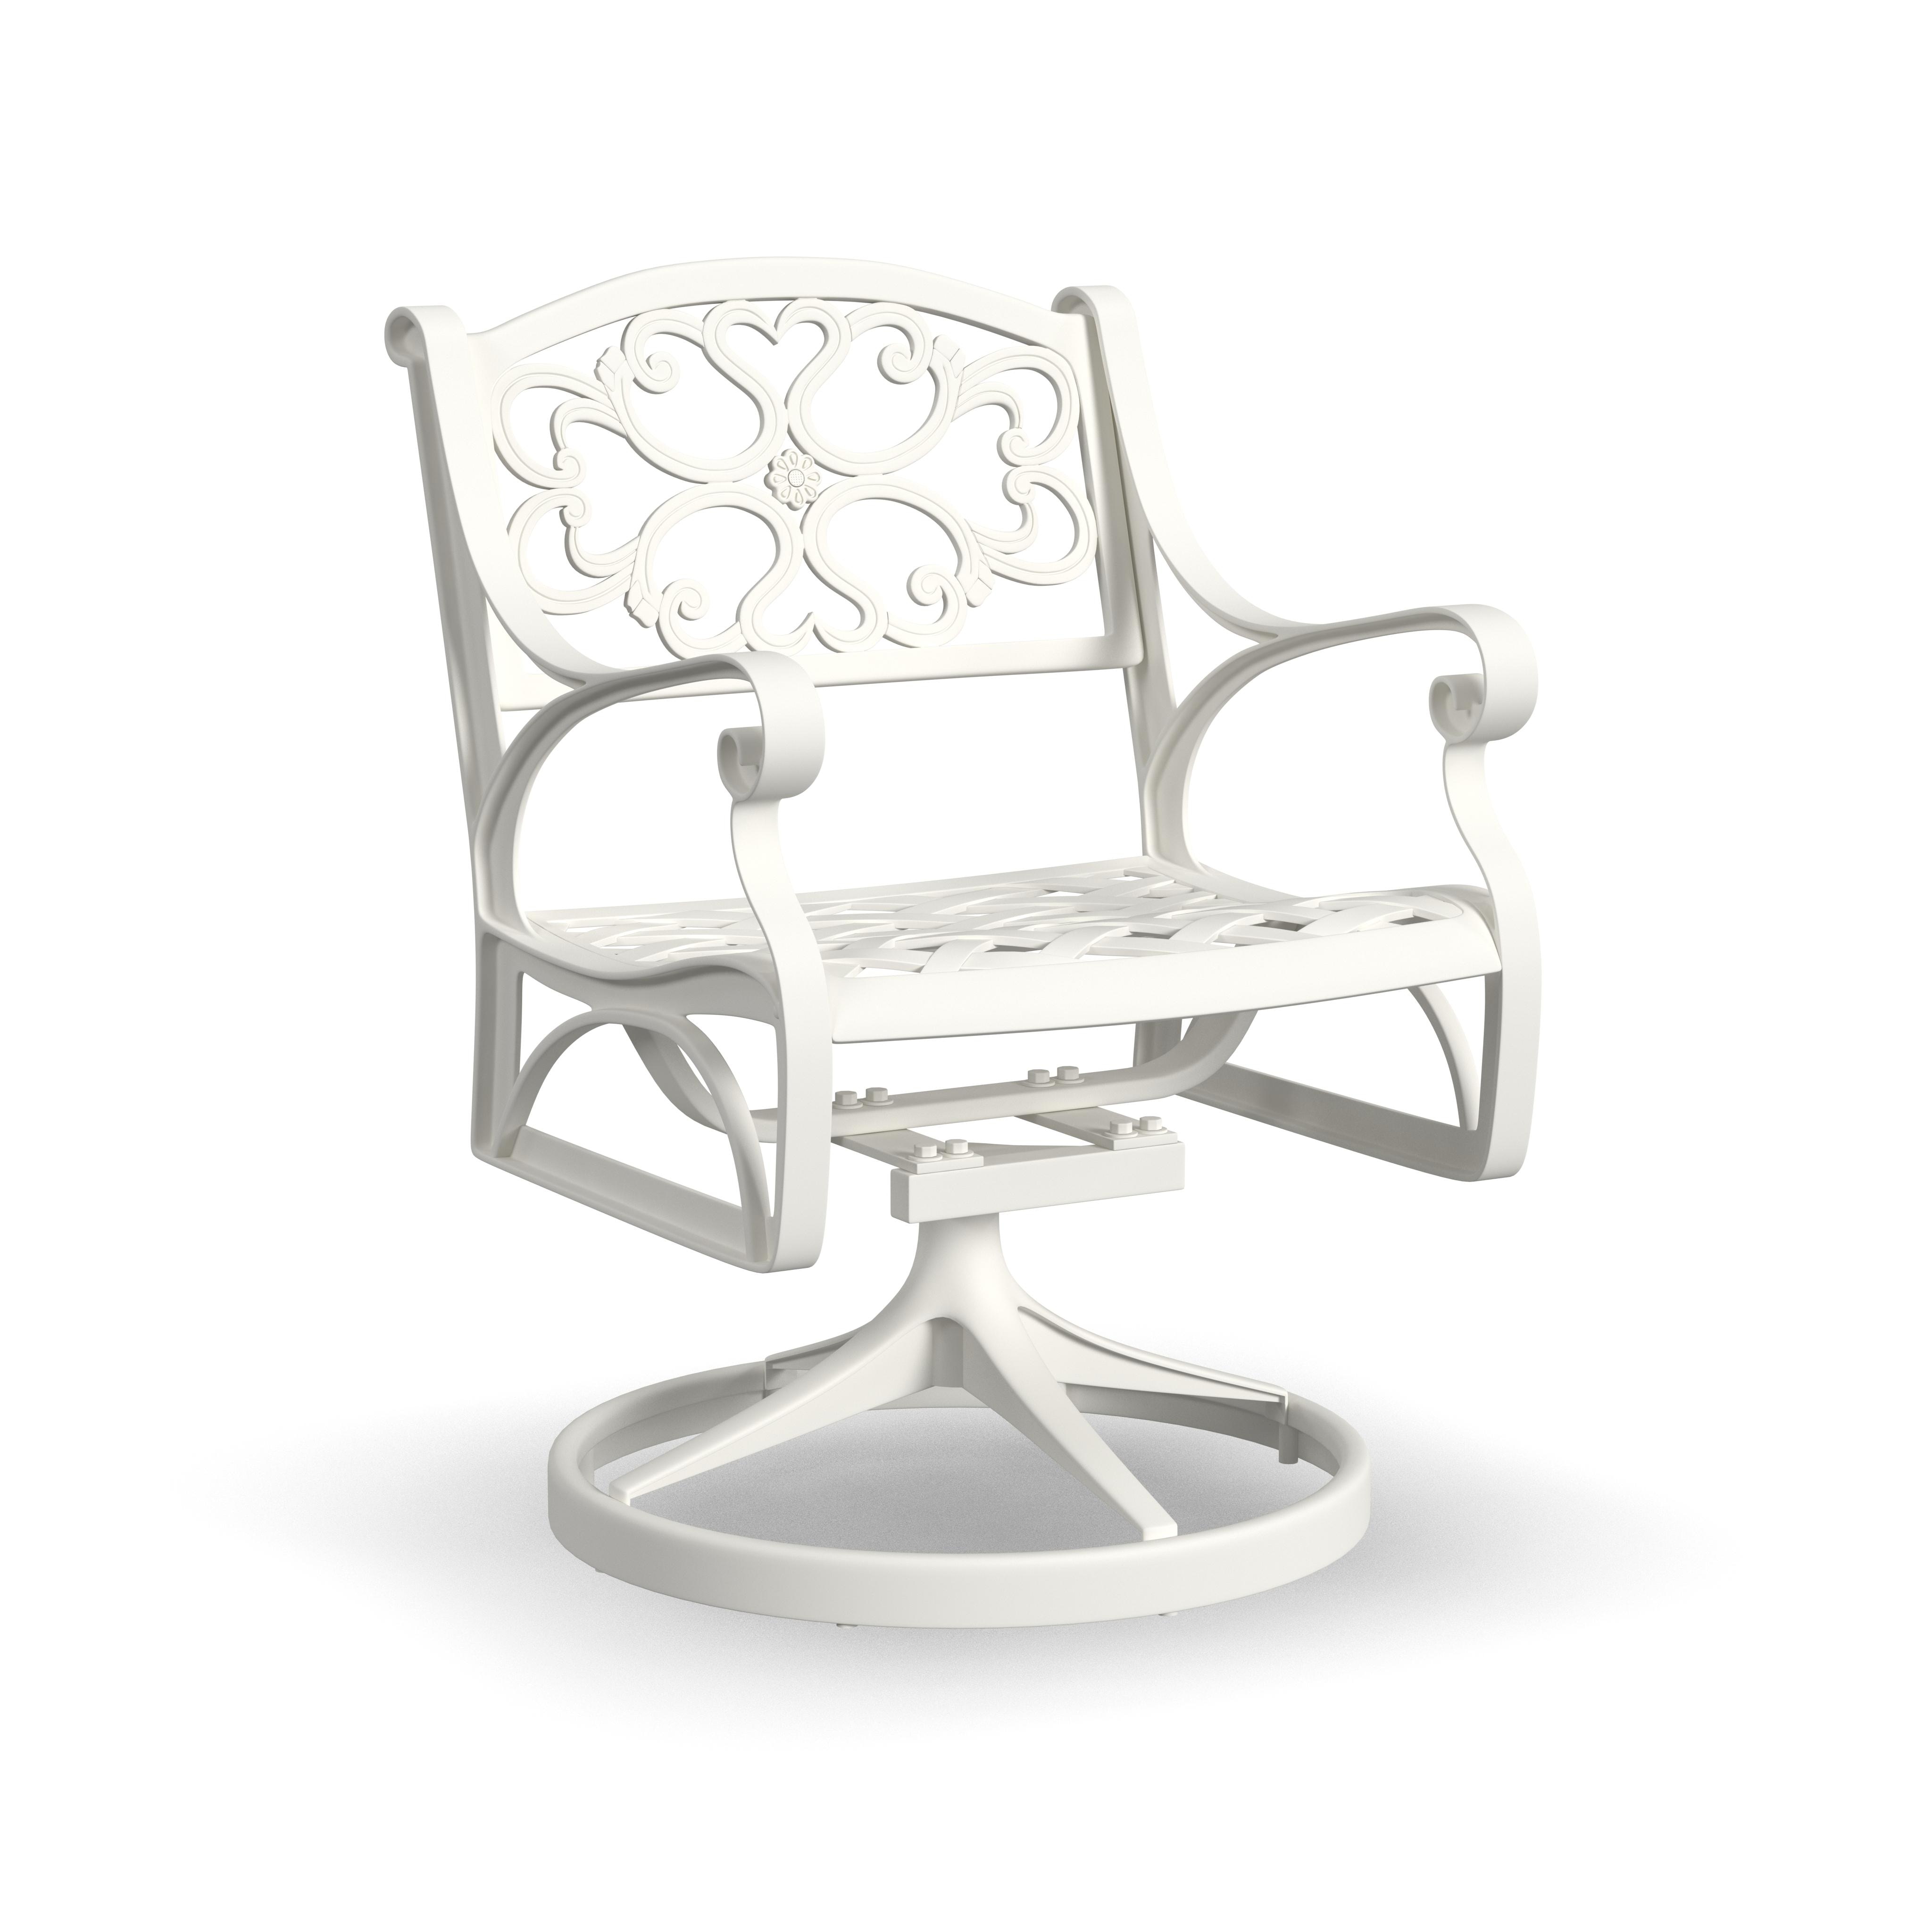 Outdoor Swivel Rocking Chair